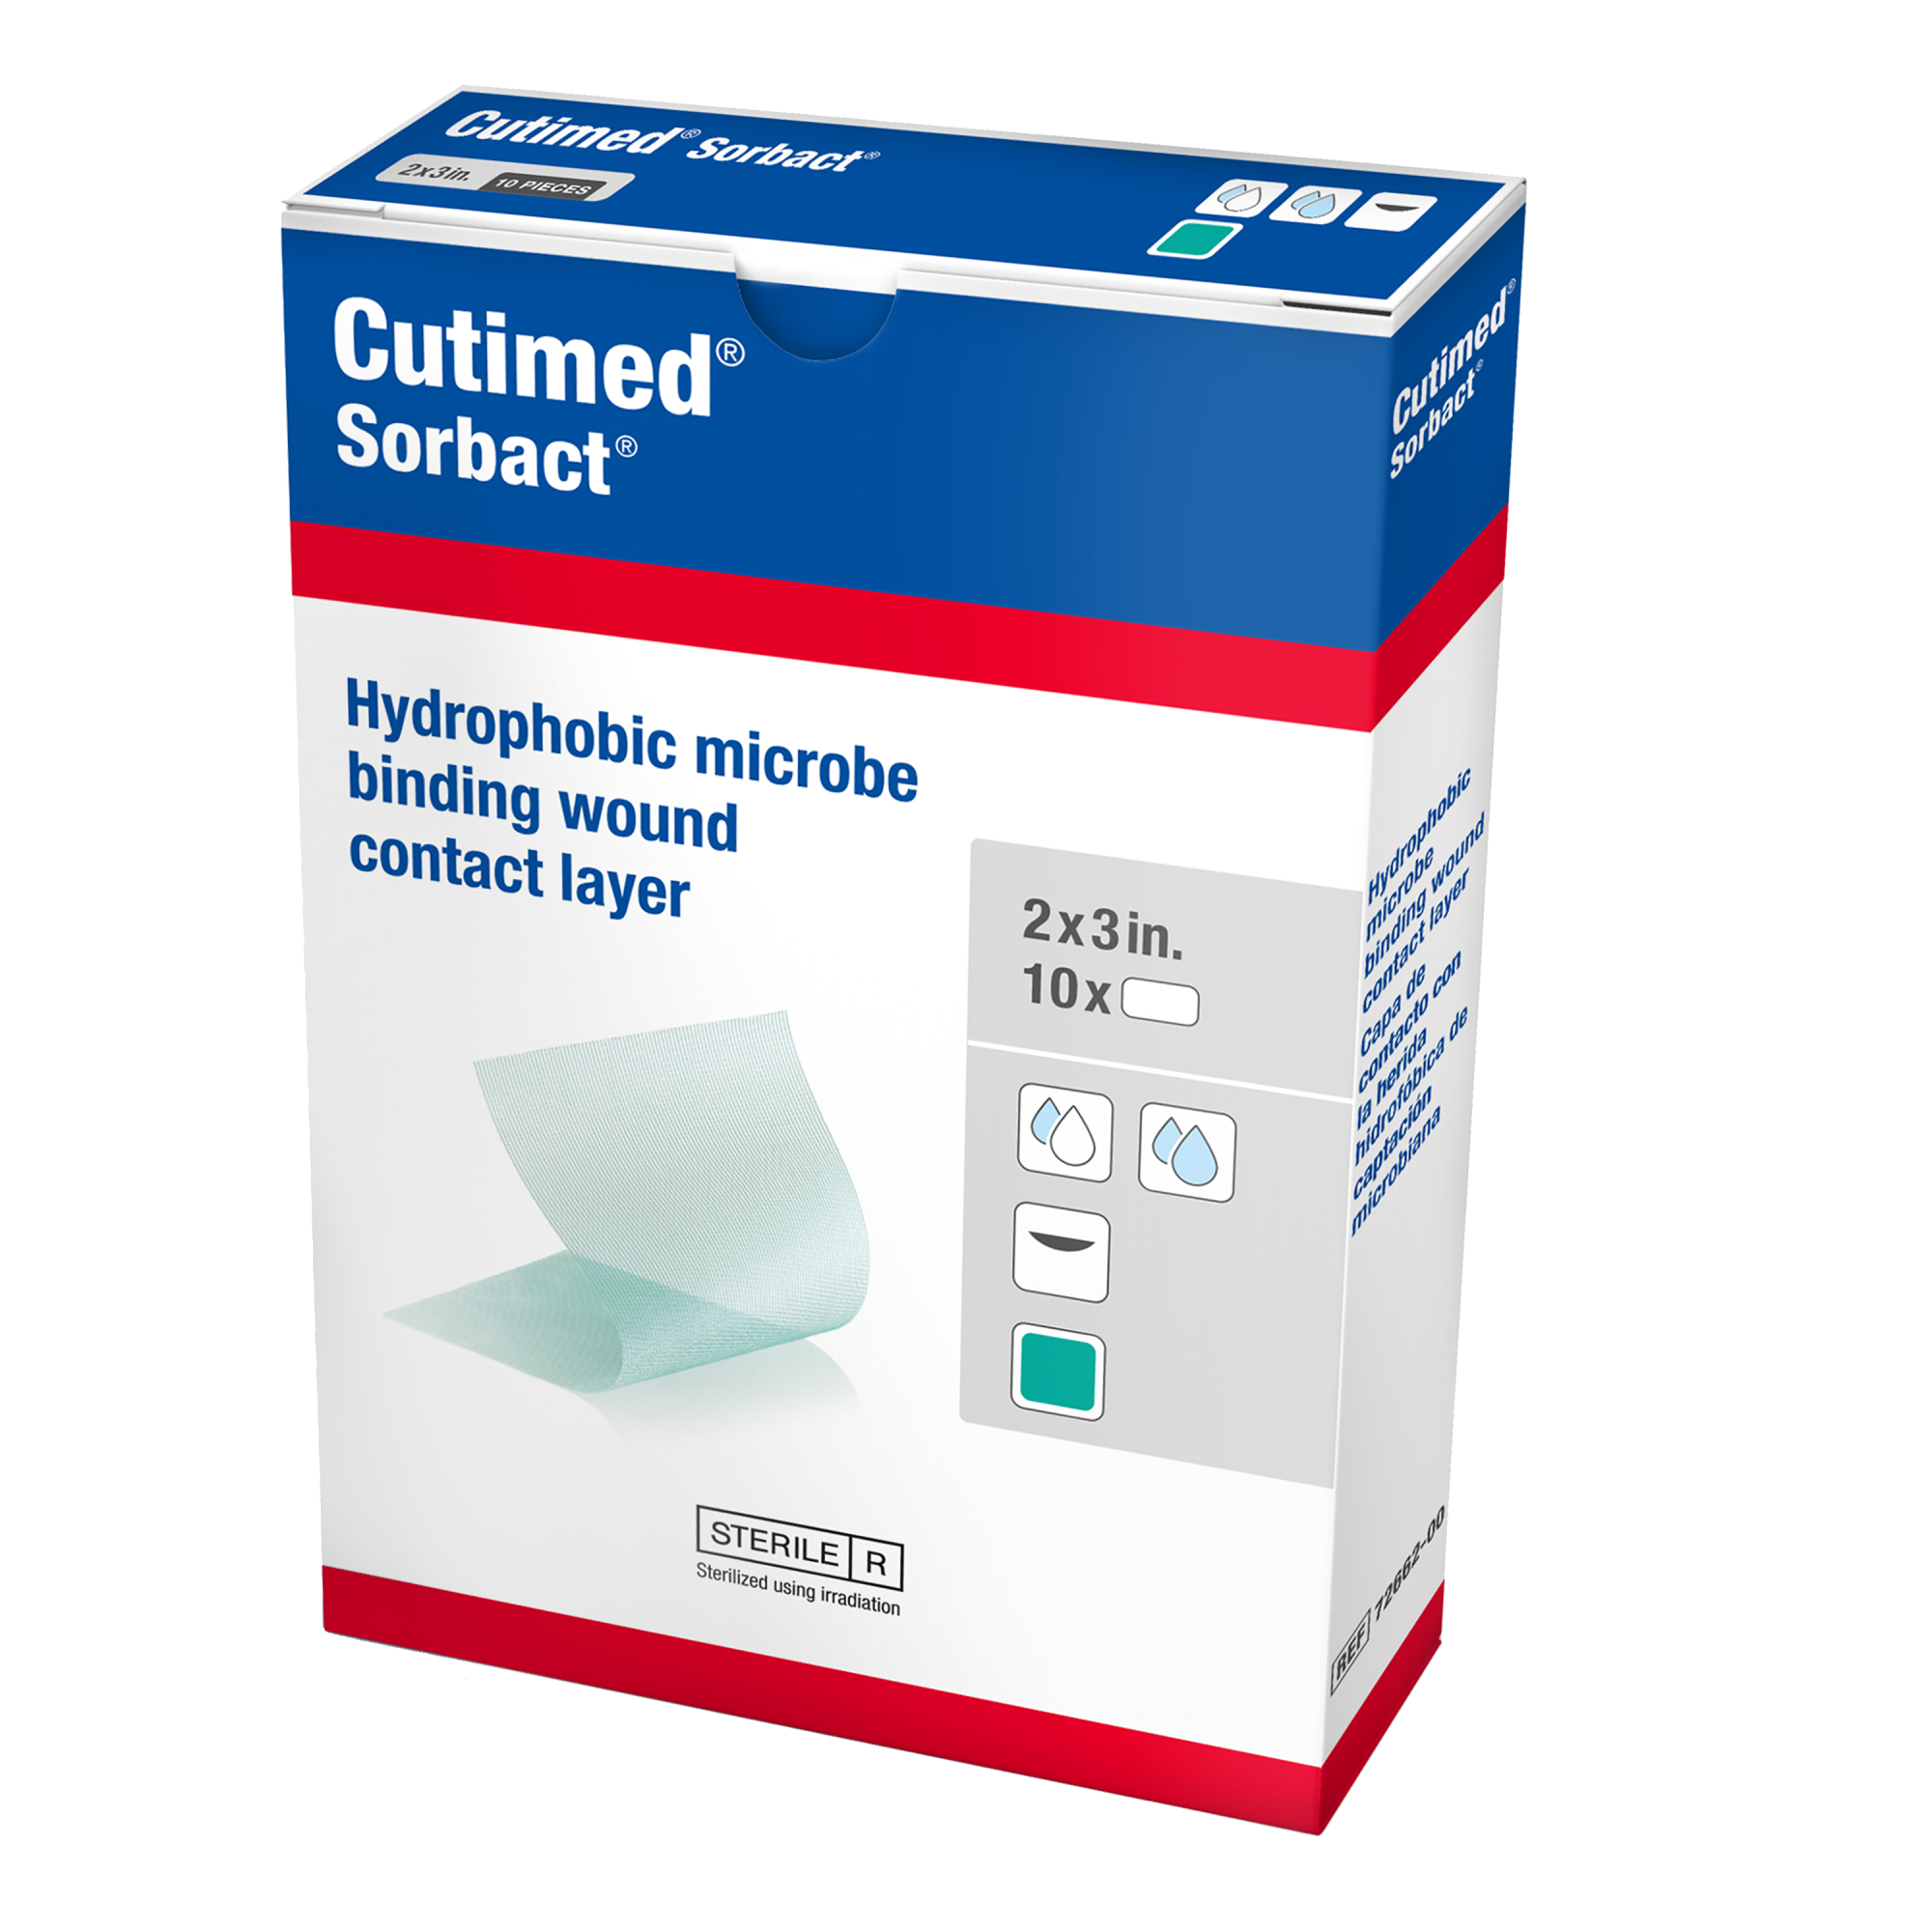 Cutimed® Sorbact® Wound Contact Layer